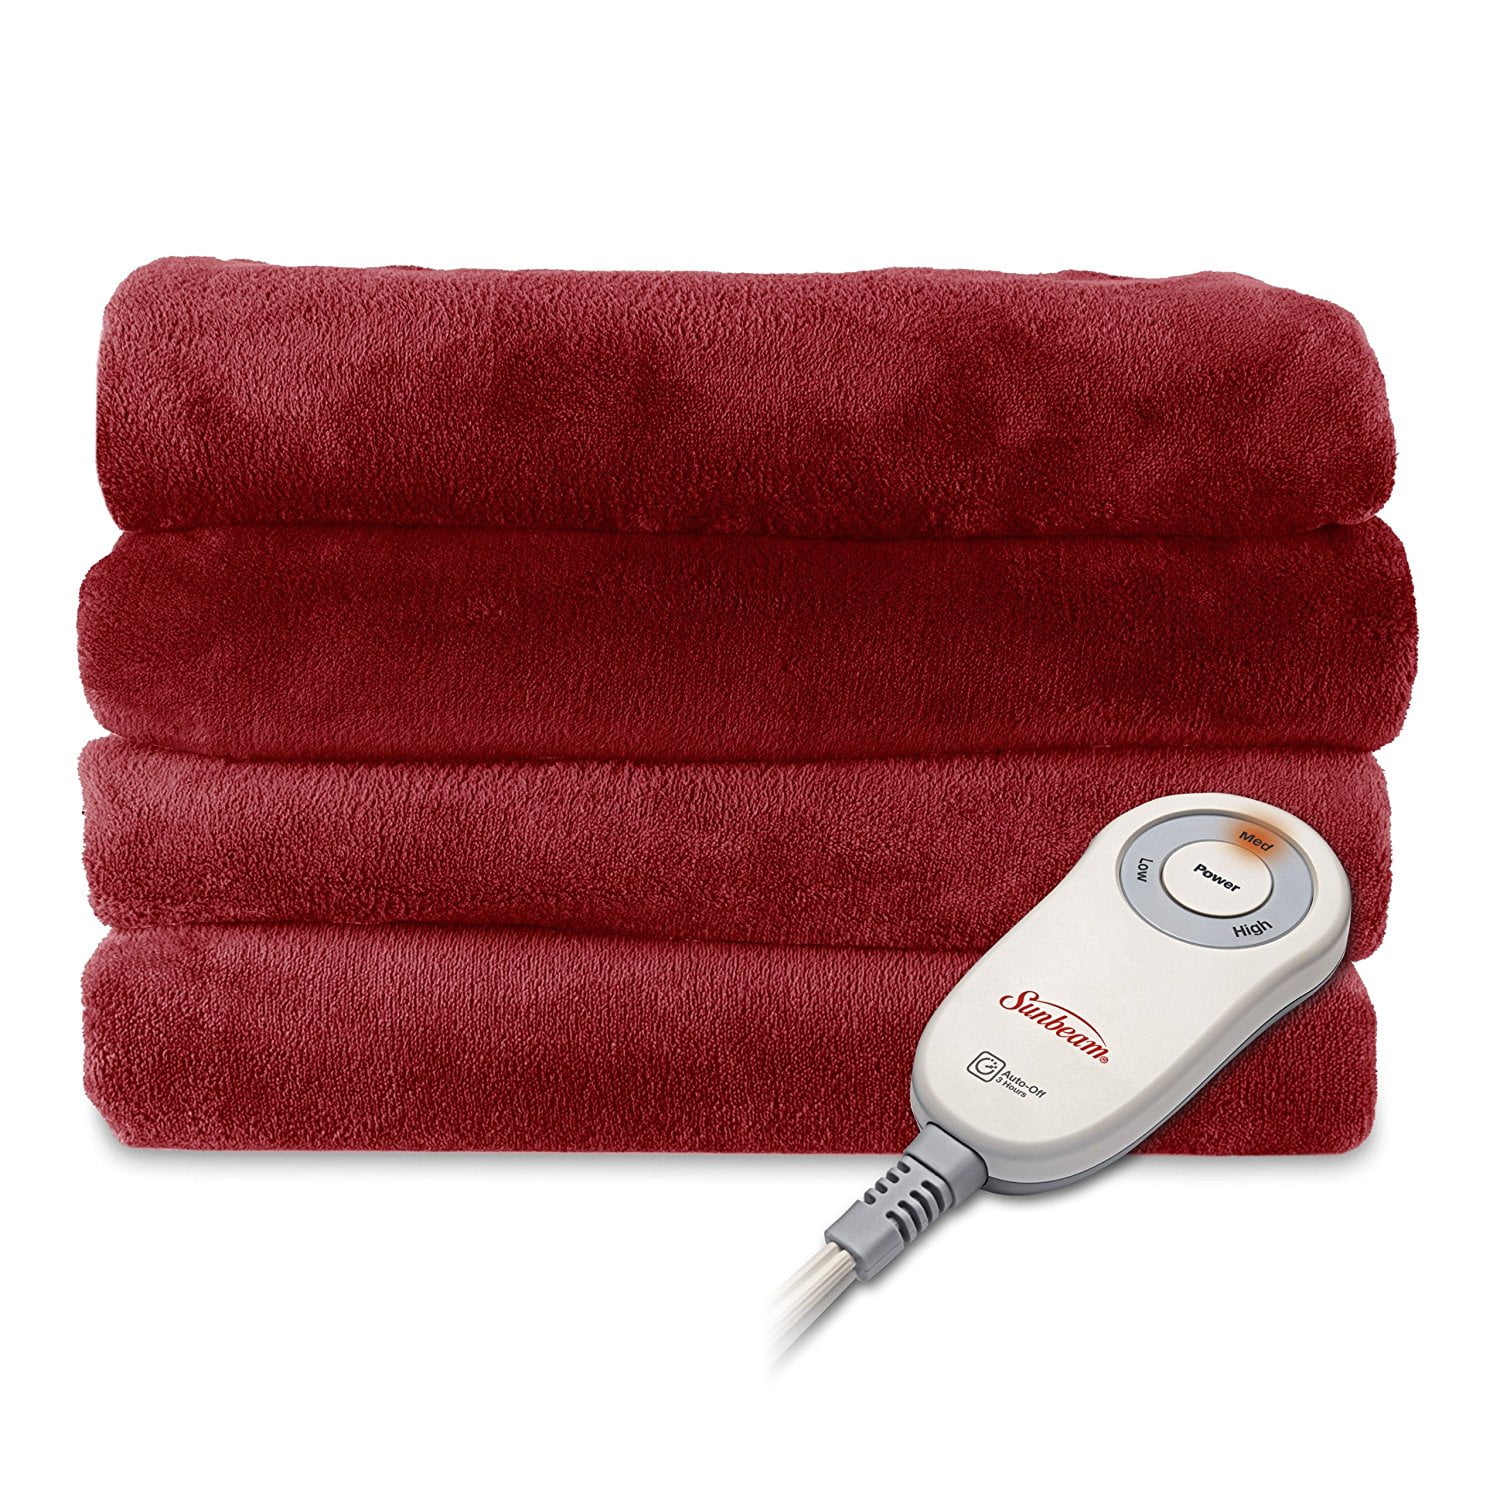 Sunbeam Heated Fleece Electric Blanket Twin Size 10 Hour Shut Off with a 6 Foot Cord Gray Grey 